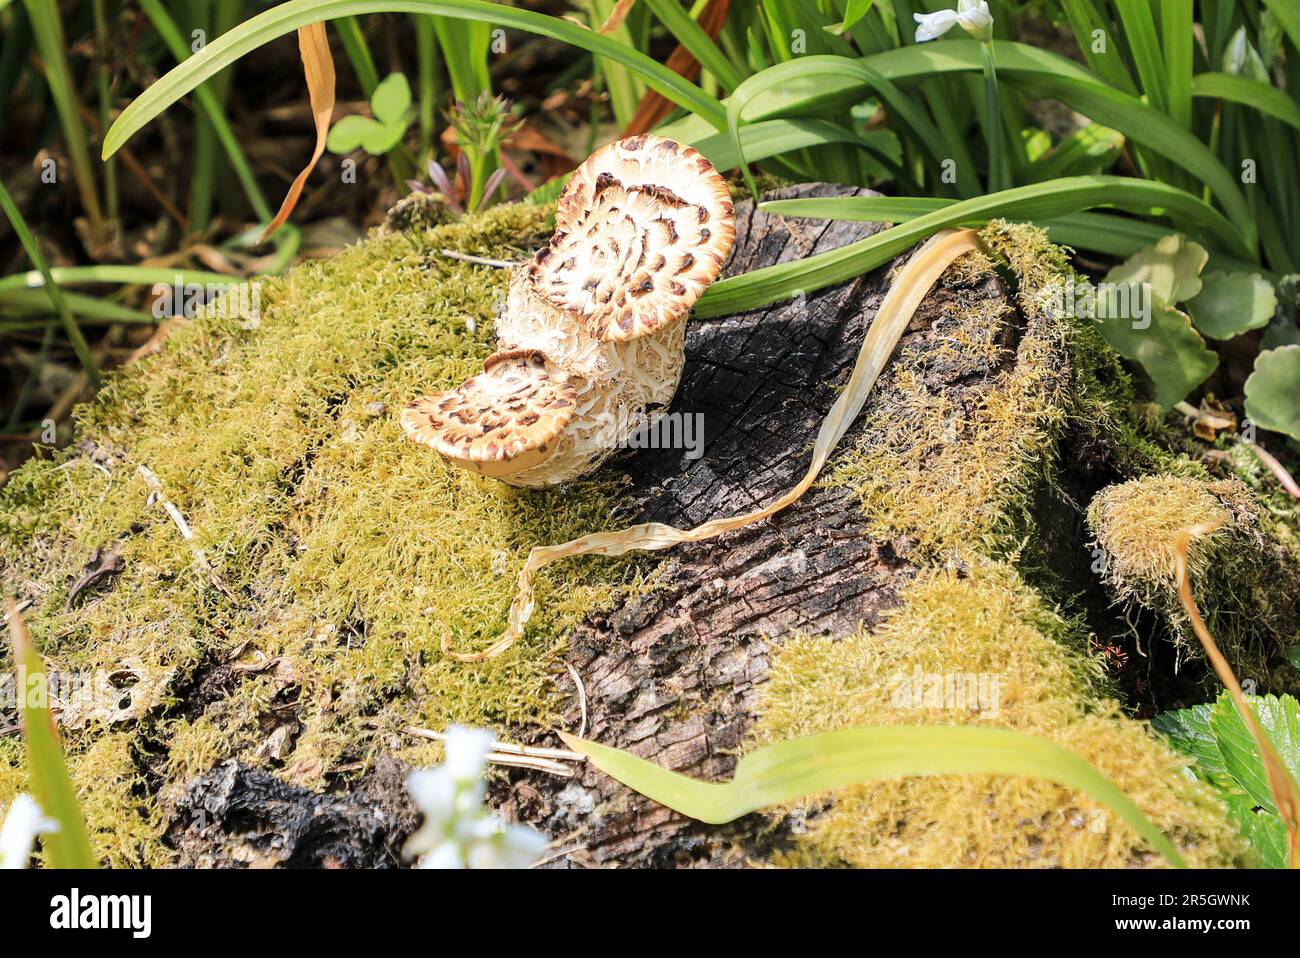 Sarcodon imbricatus, commonly known as the shingled hedgehog or scaly hedgehog, is a species of tooth fungus, England, UK Stock Photo